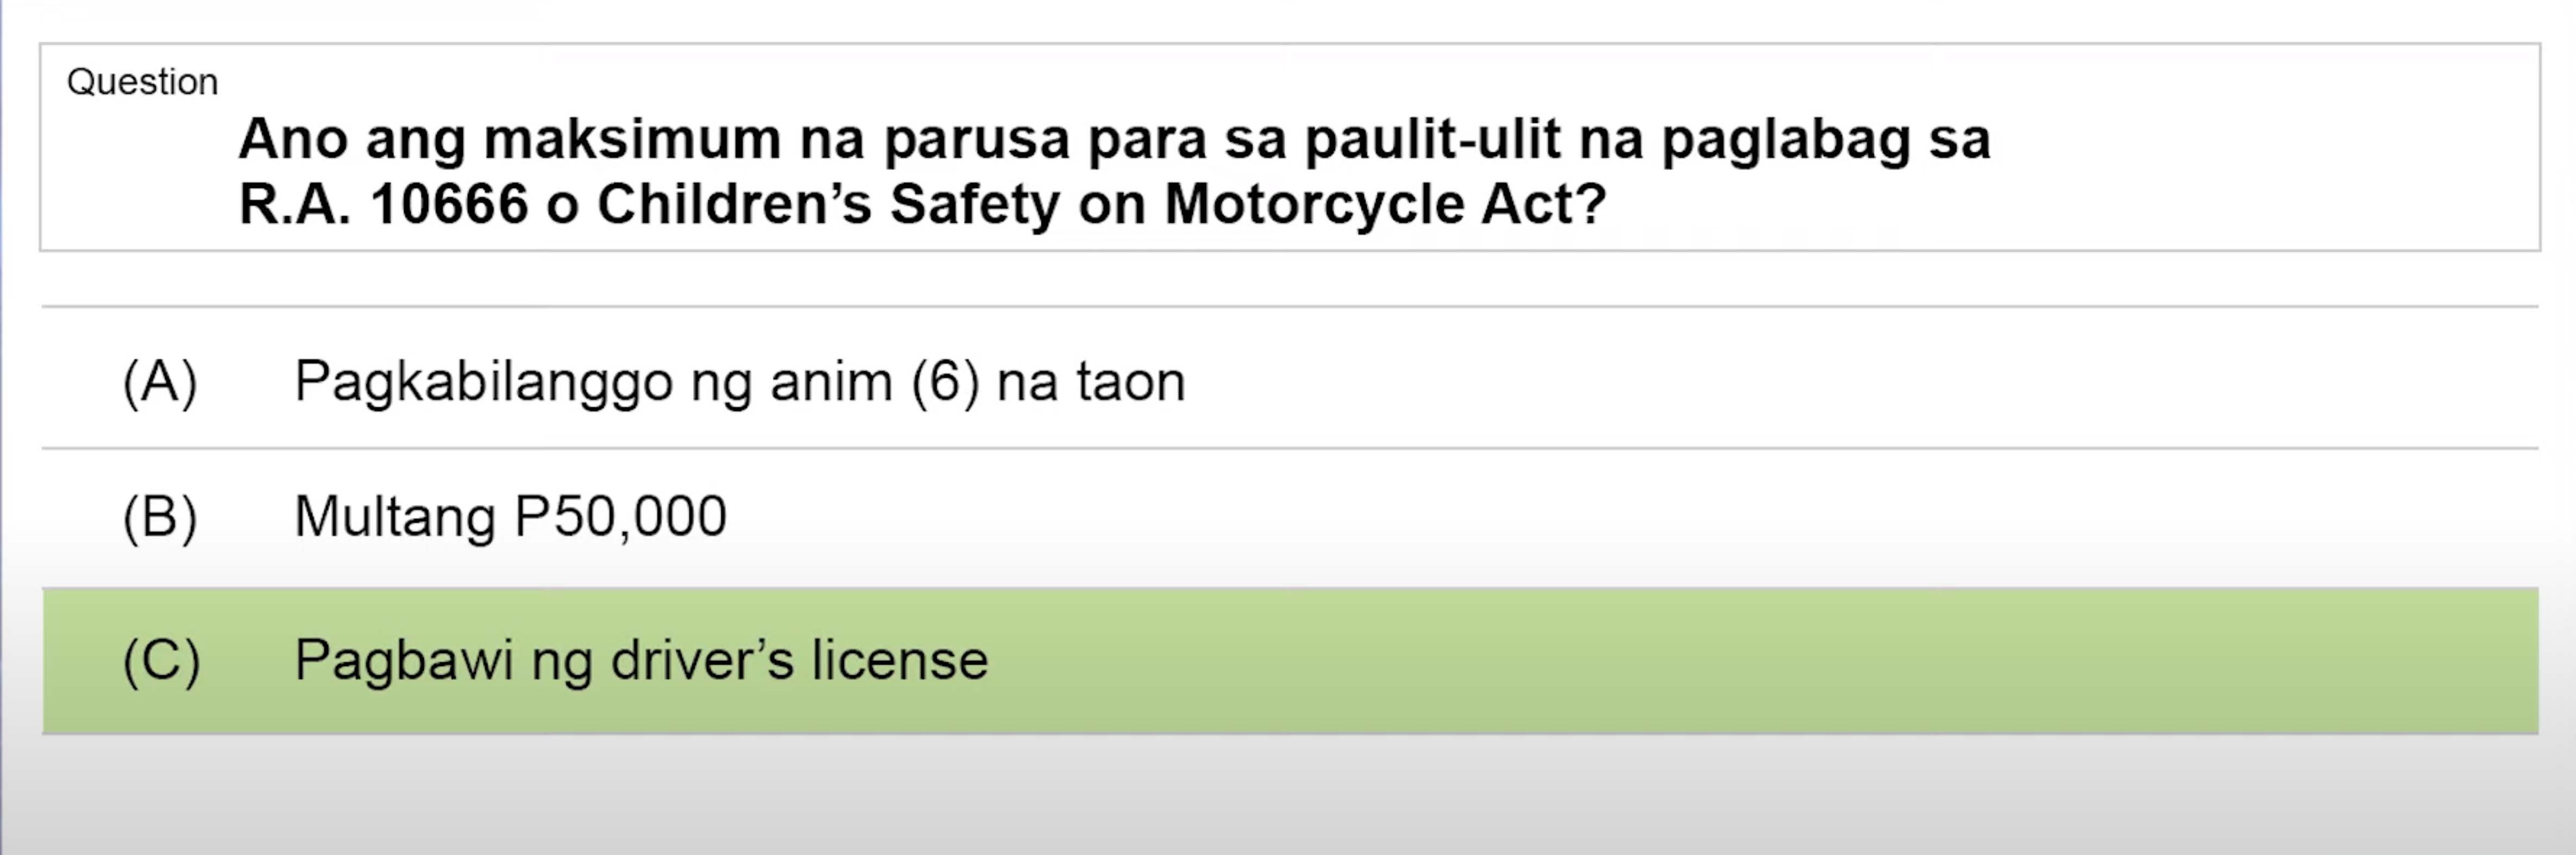 LTO Tagalog non pro exam reviewer motorcycle (19)